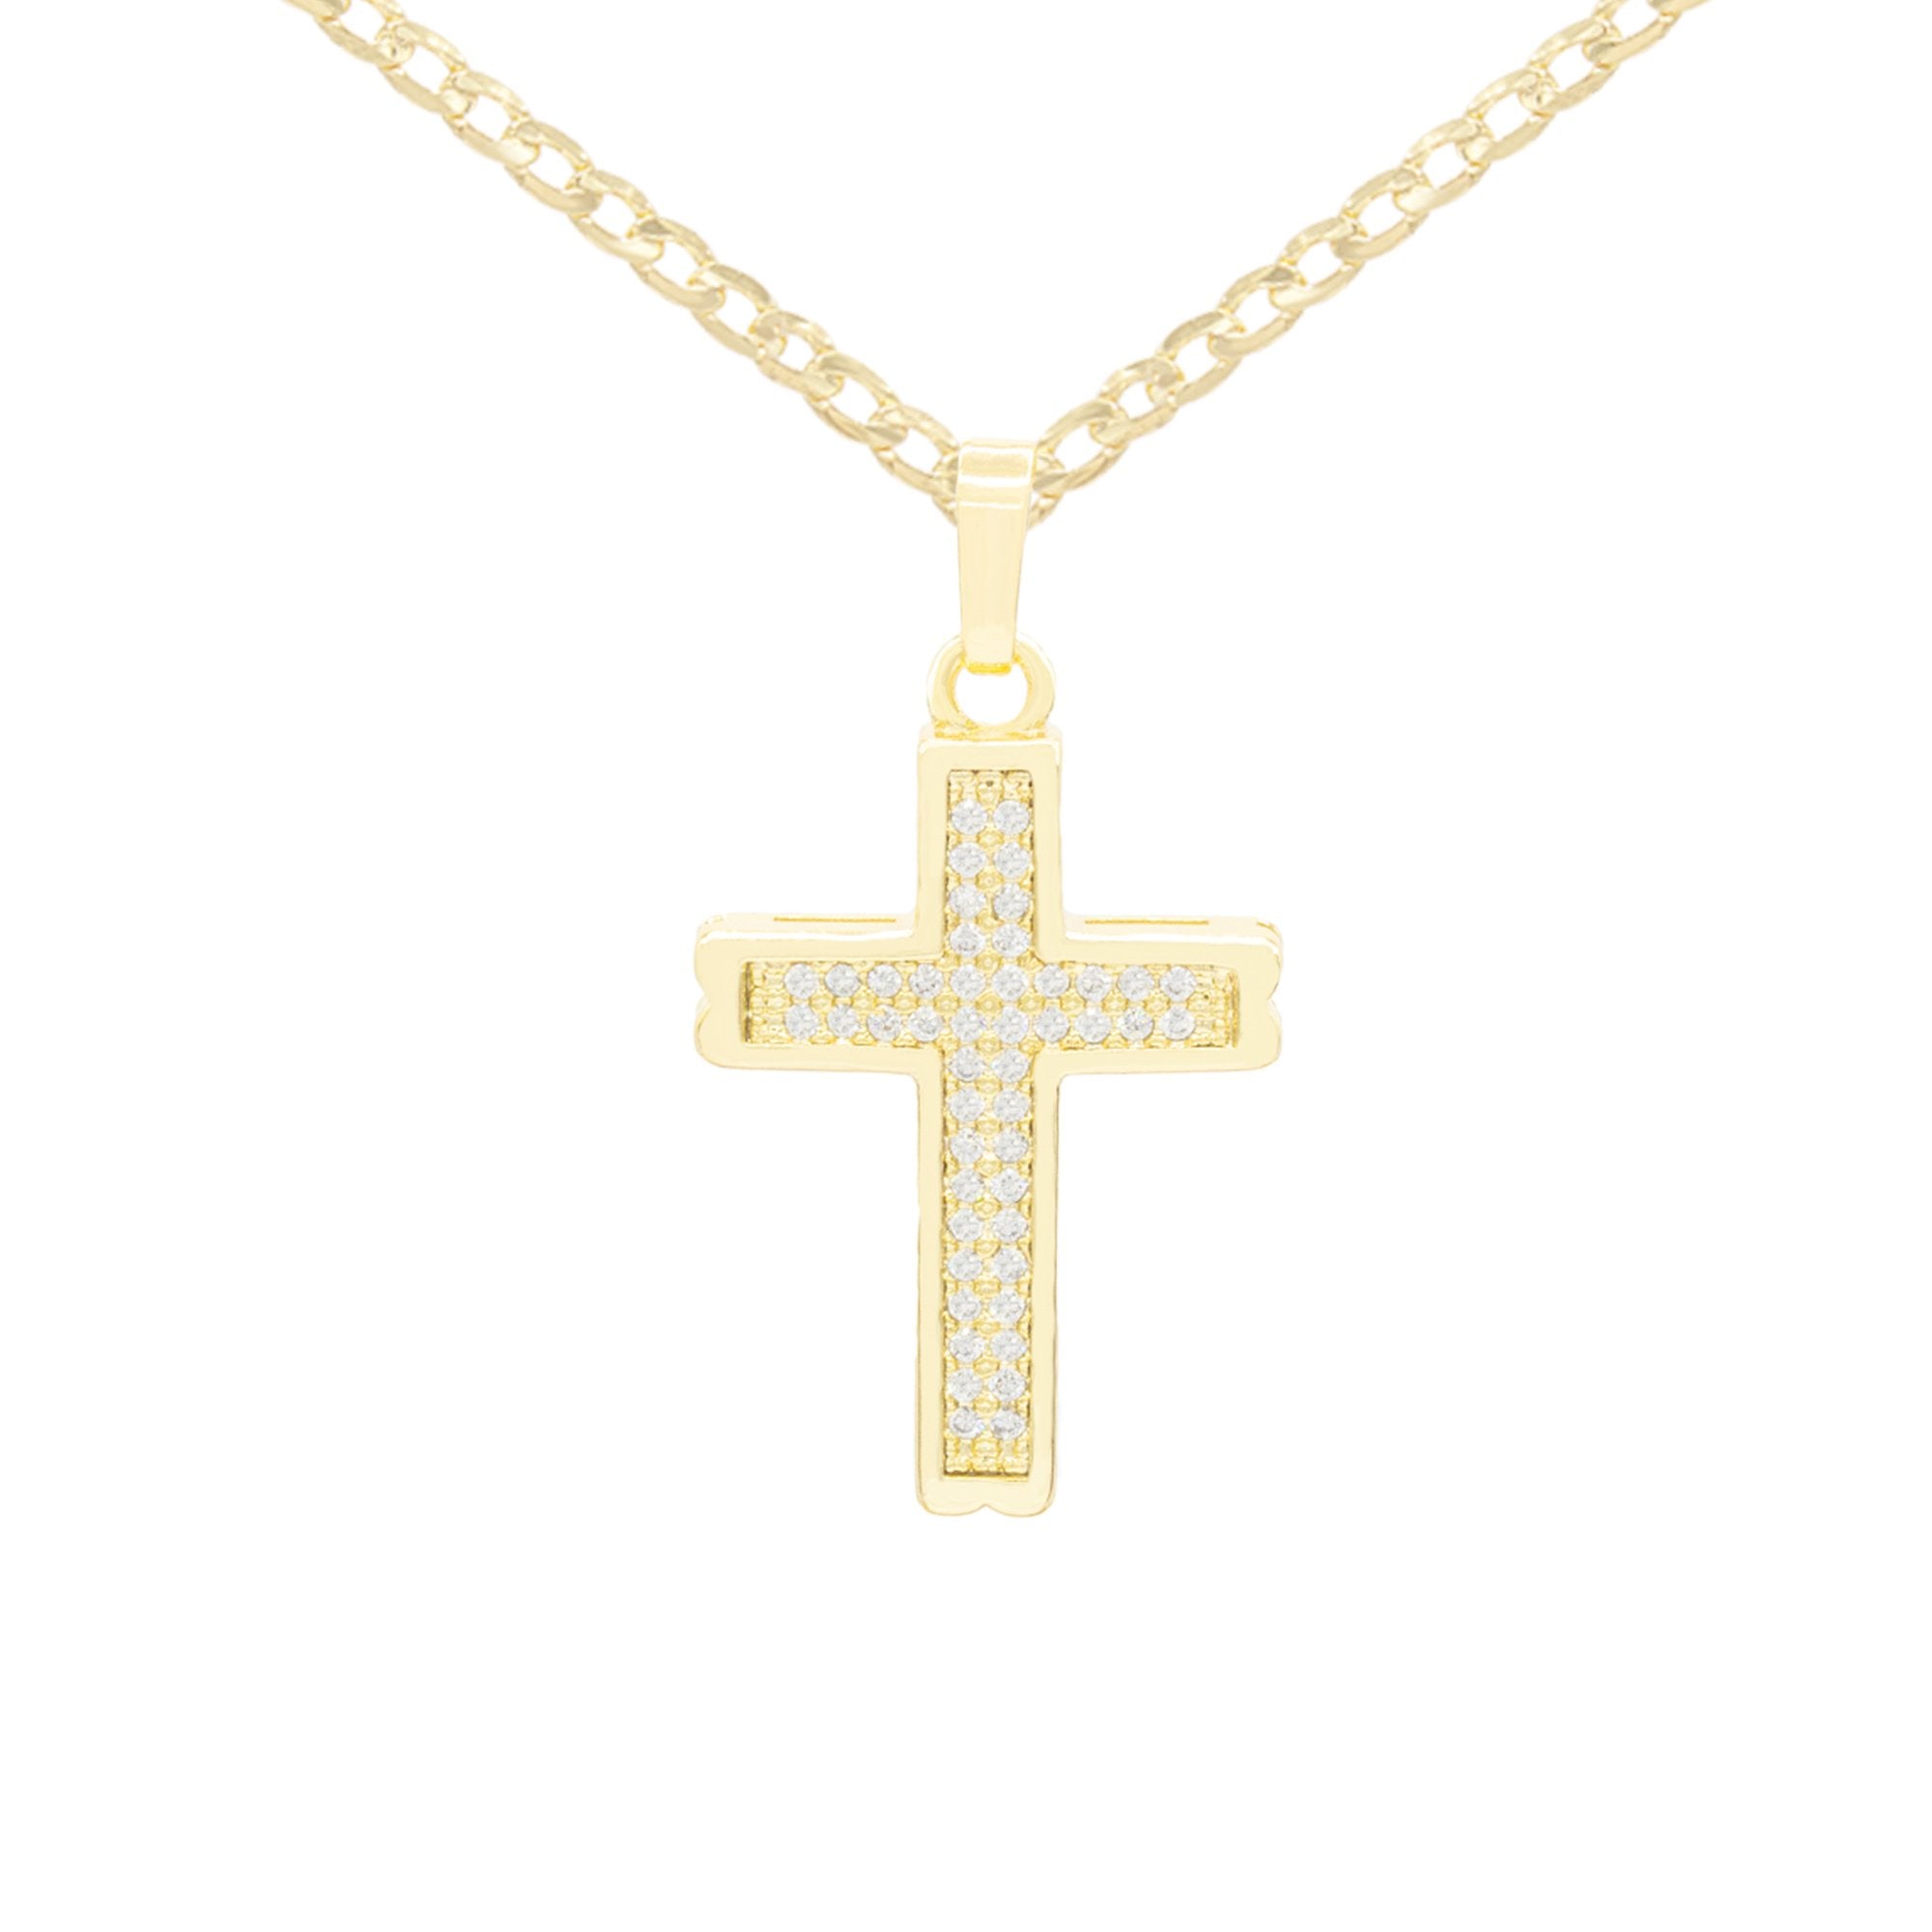 CZ Stone Bordered Cross Cubic Zirconia Pendant With Necklace Set 14K Gold Filled